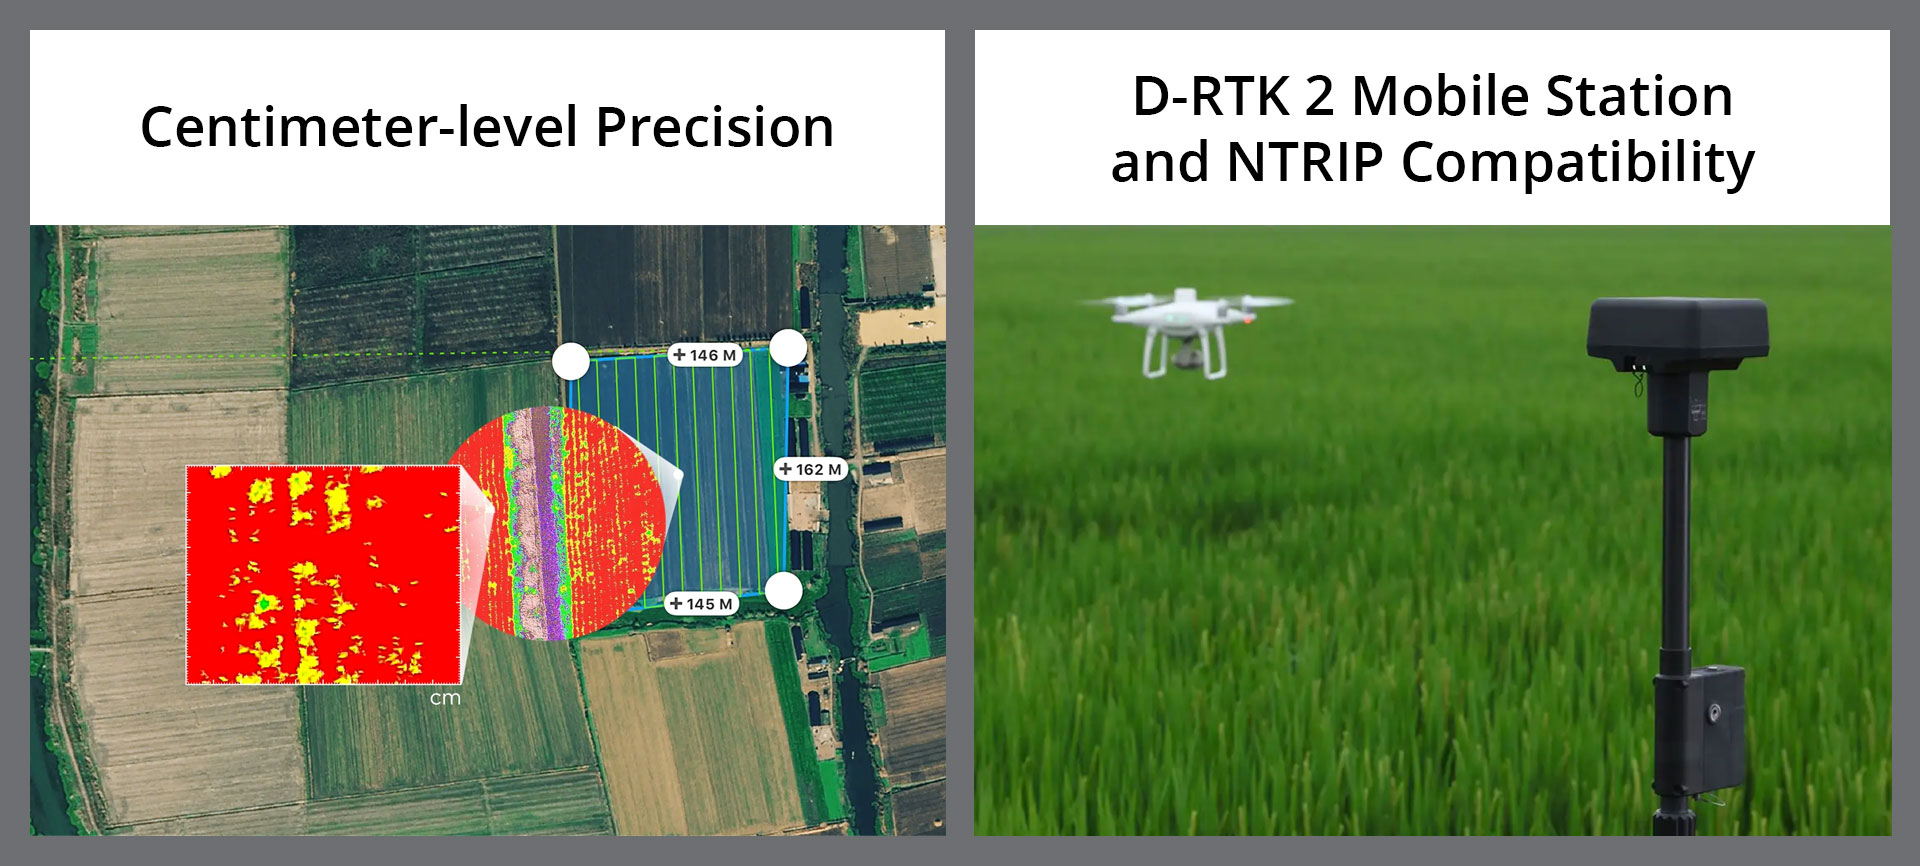 DJI P4 Multispectral Centimeter-level Precision and D-RTK 2 Mobile Station with NTRIP Compatibility